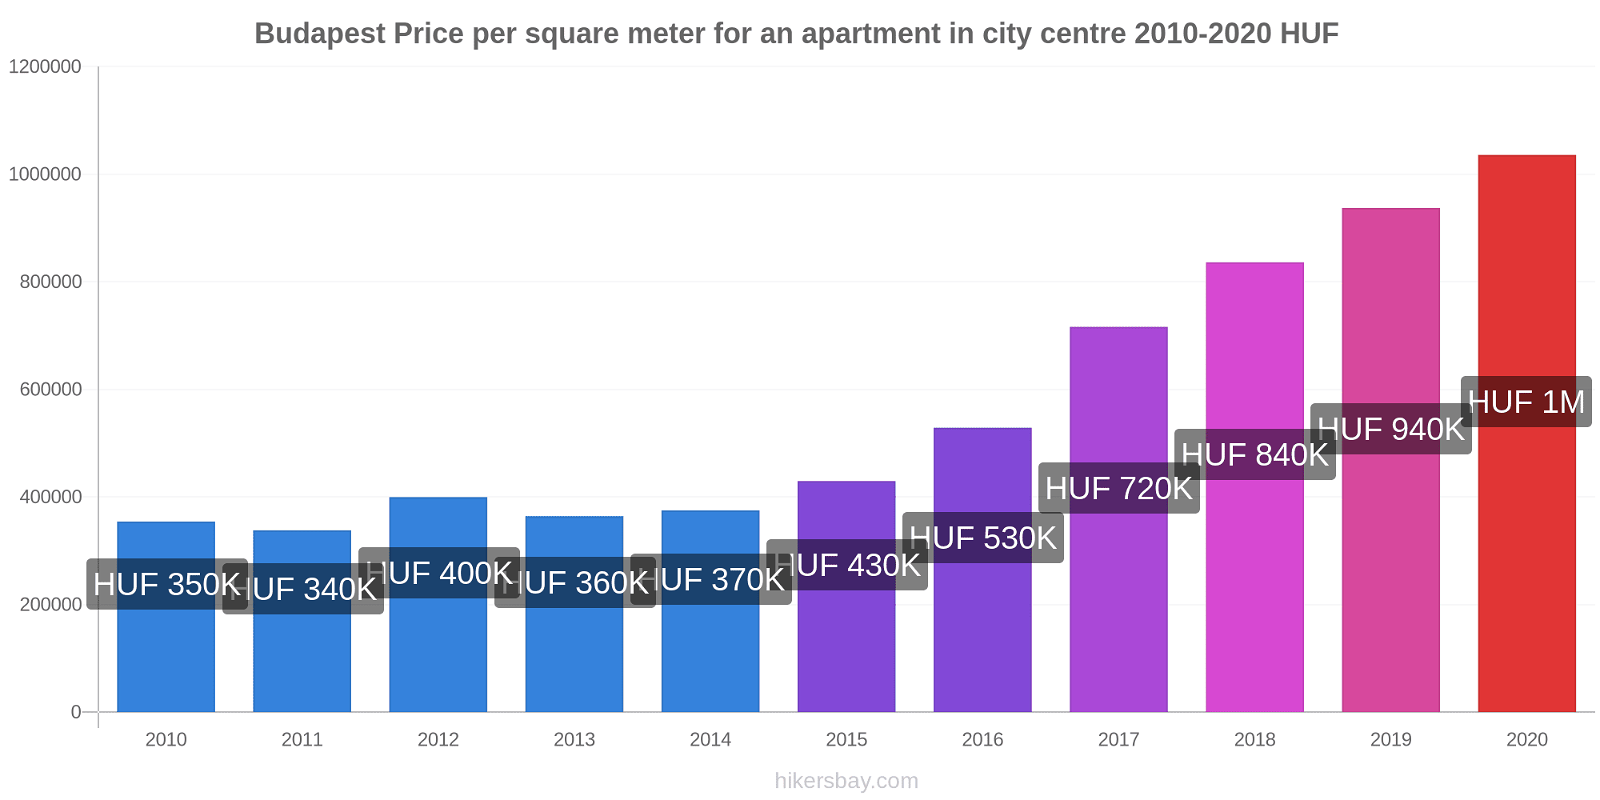 Budapest price changes Price per square meter for an apartment in city centre hikersbay.com